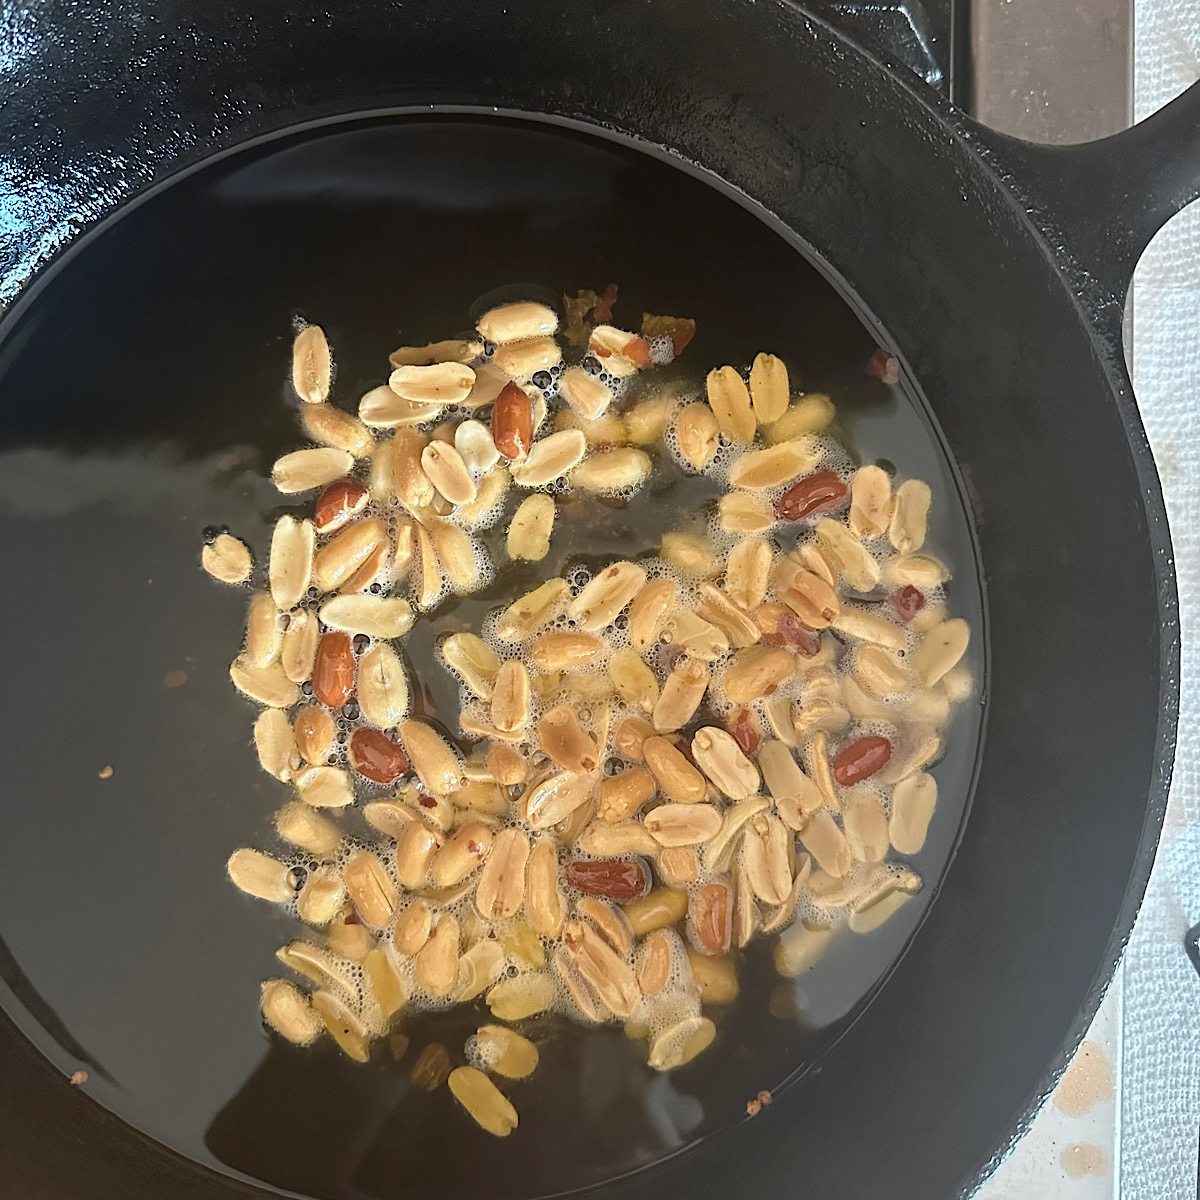 Peanuts frying in a cast iron skillet